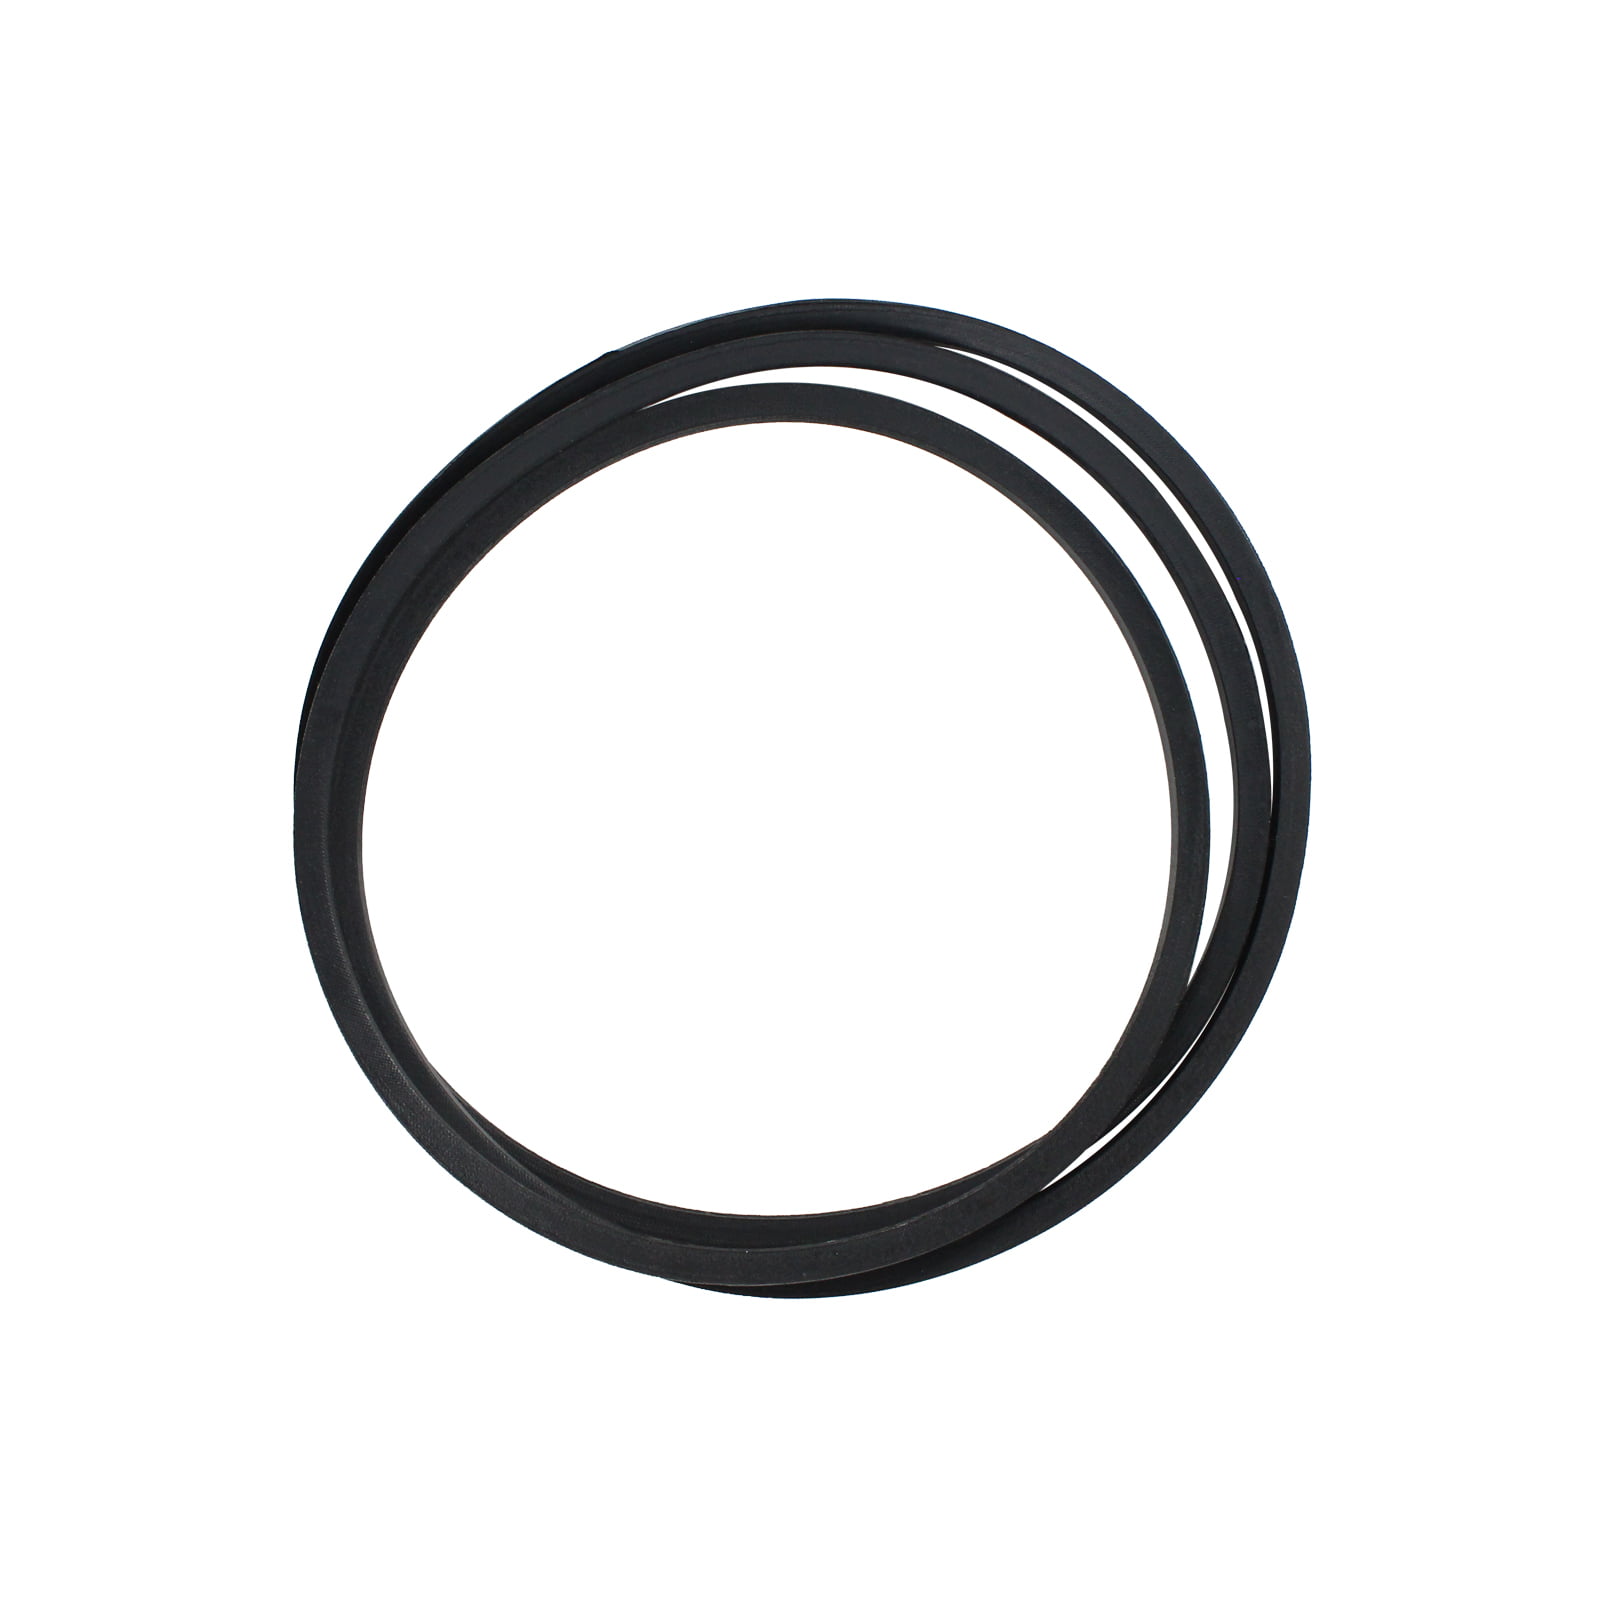 PC9152 Compatible with M152284 Transmission Belt M144044 Drive Belt Replacement for John Deere LT180 Lawn Tractor 